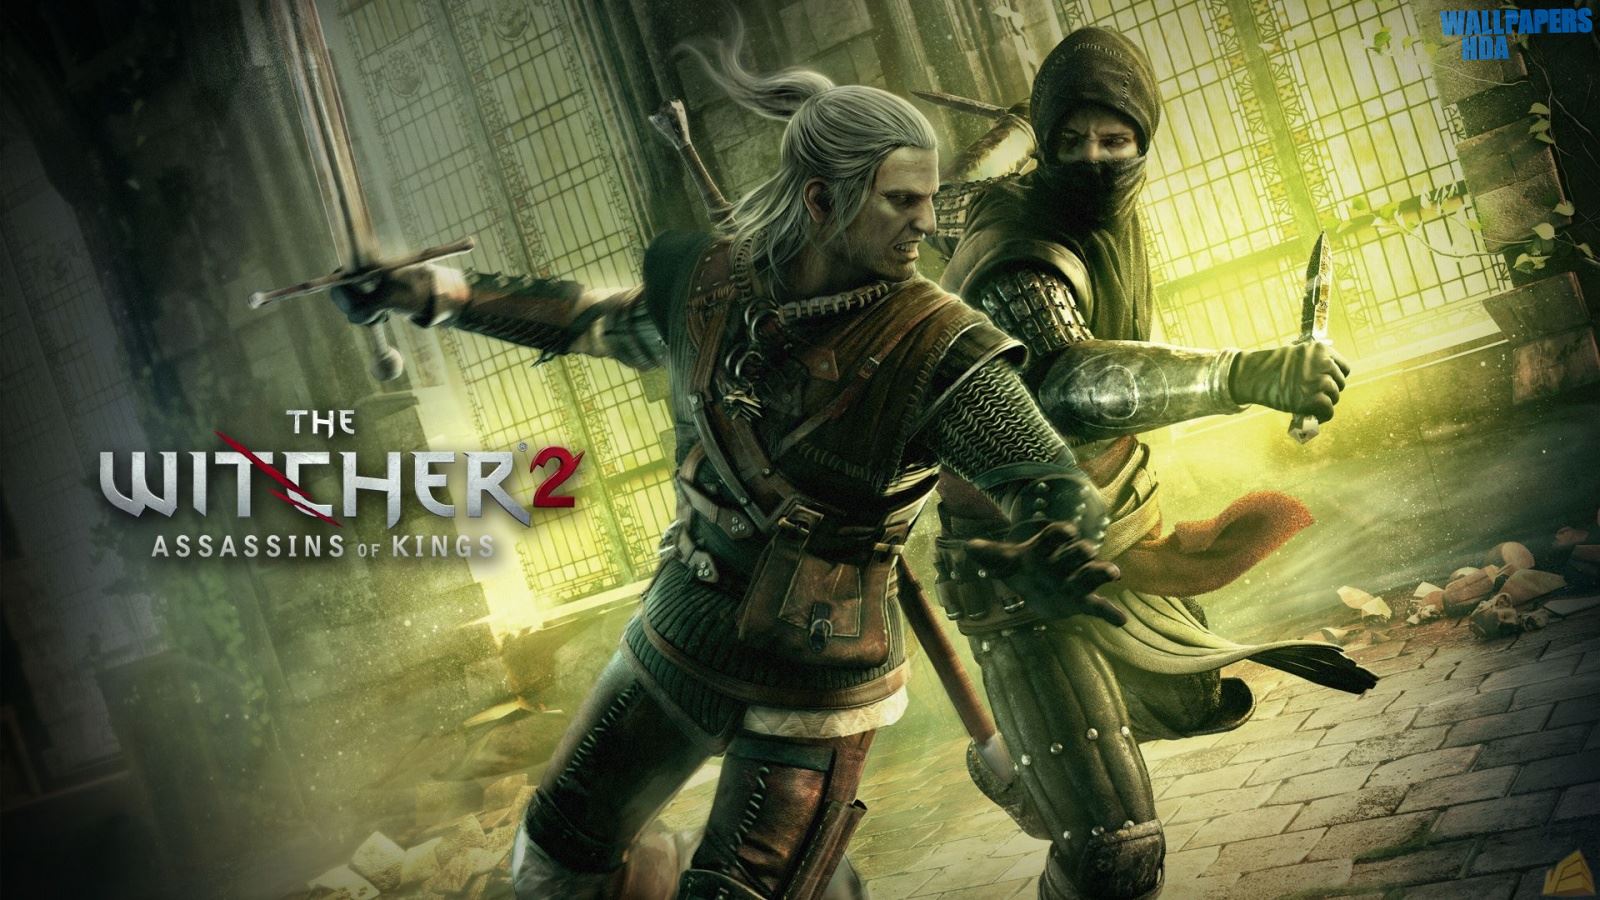 The witcher 2 assassins of kings 1600x900